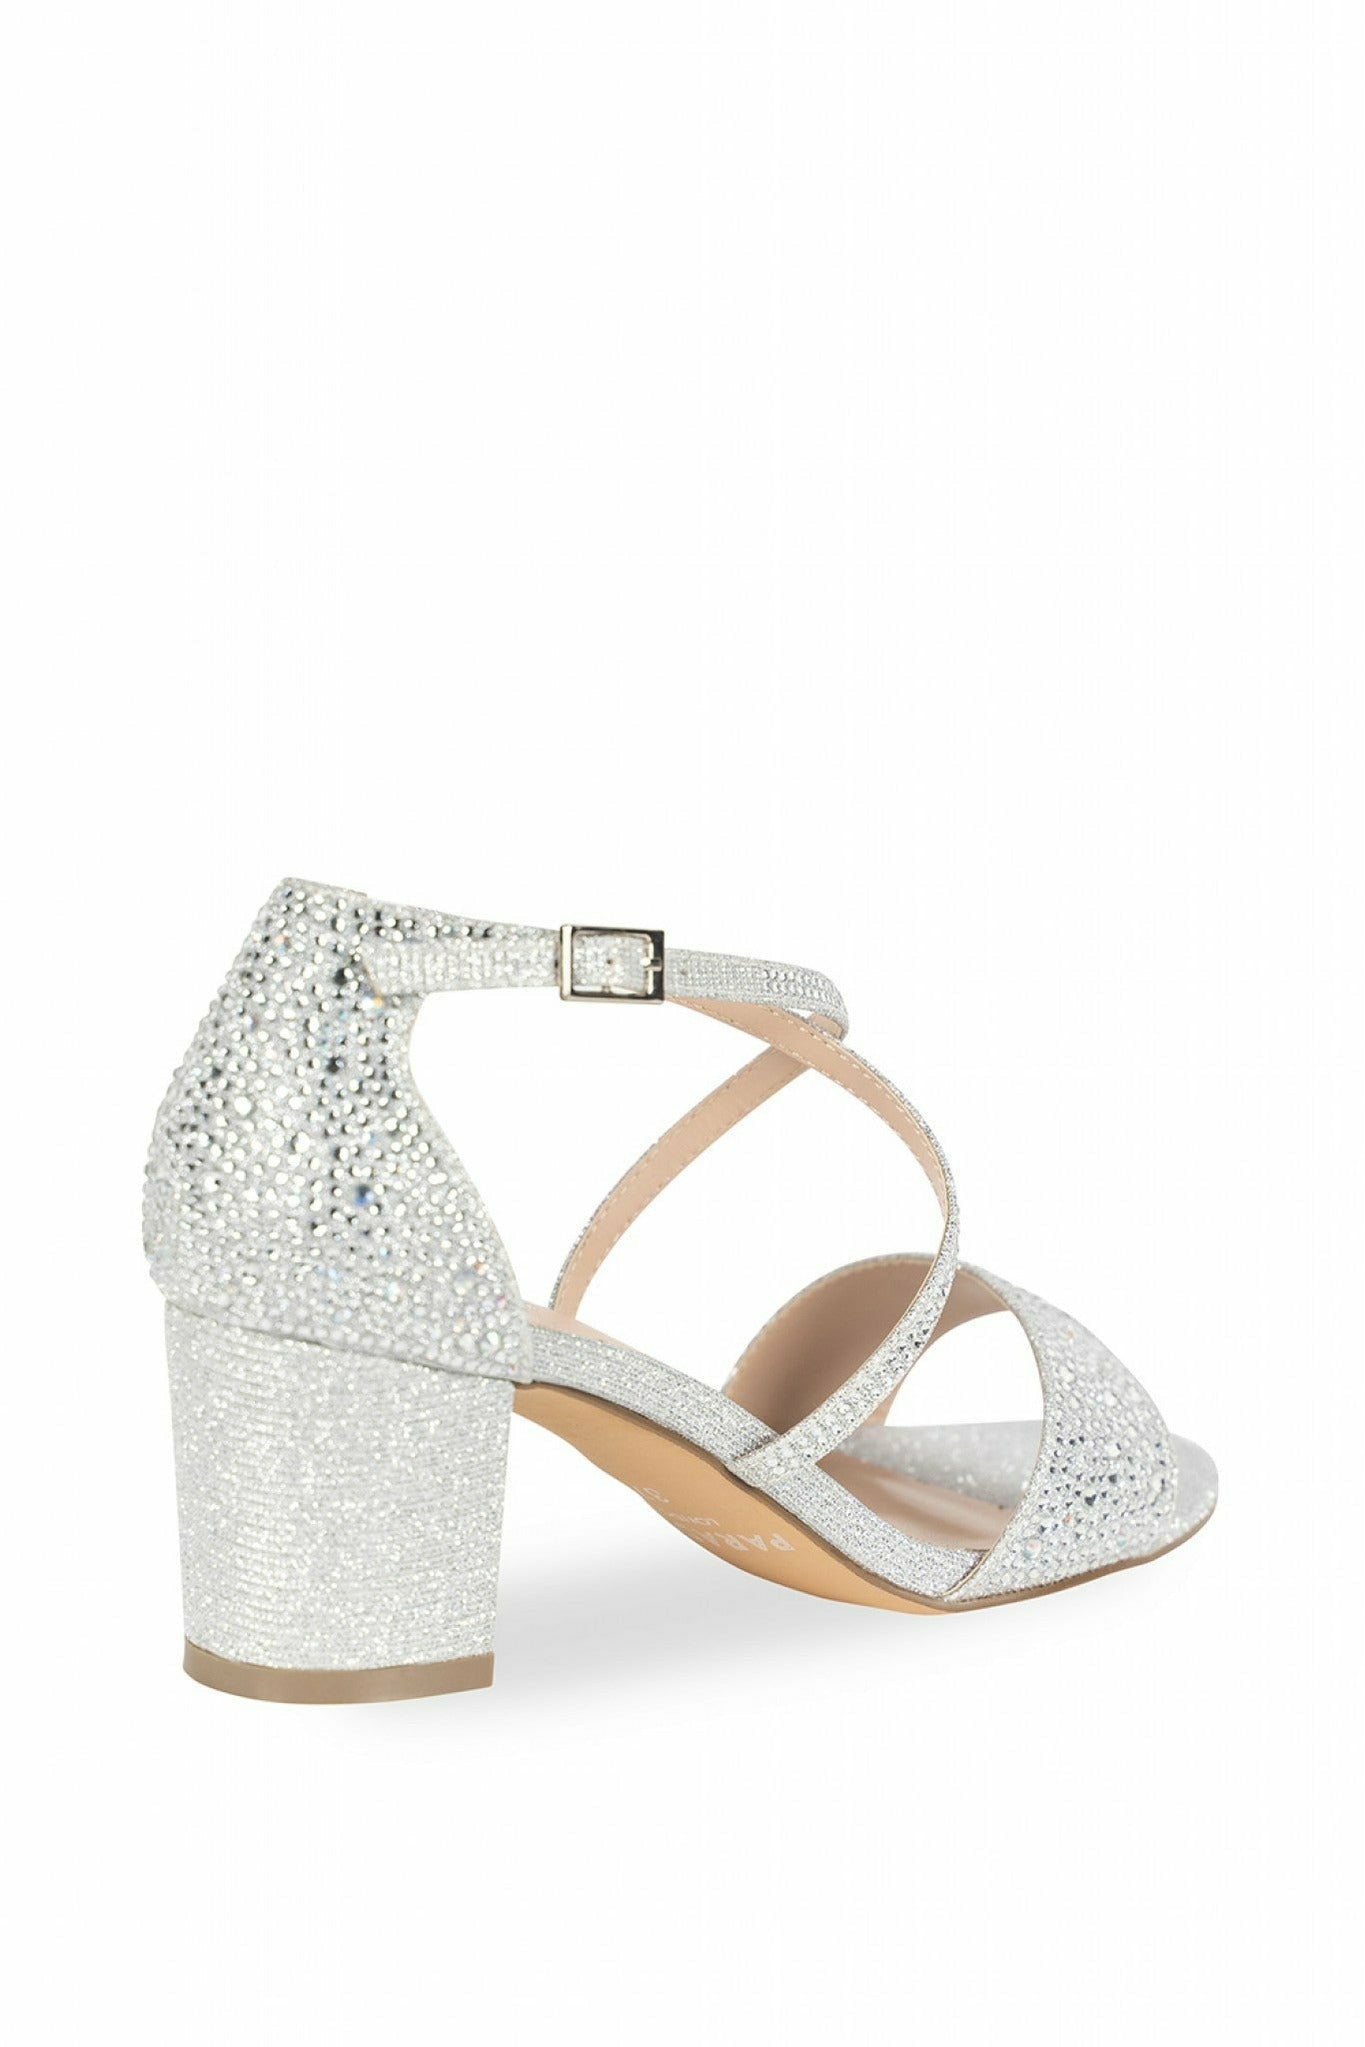 Paradox London Ines - Silver Glitter Mid Block Heel Ankle Strap Sandals ...